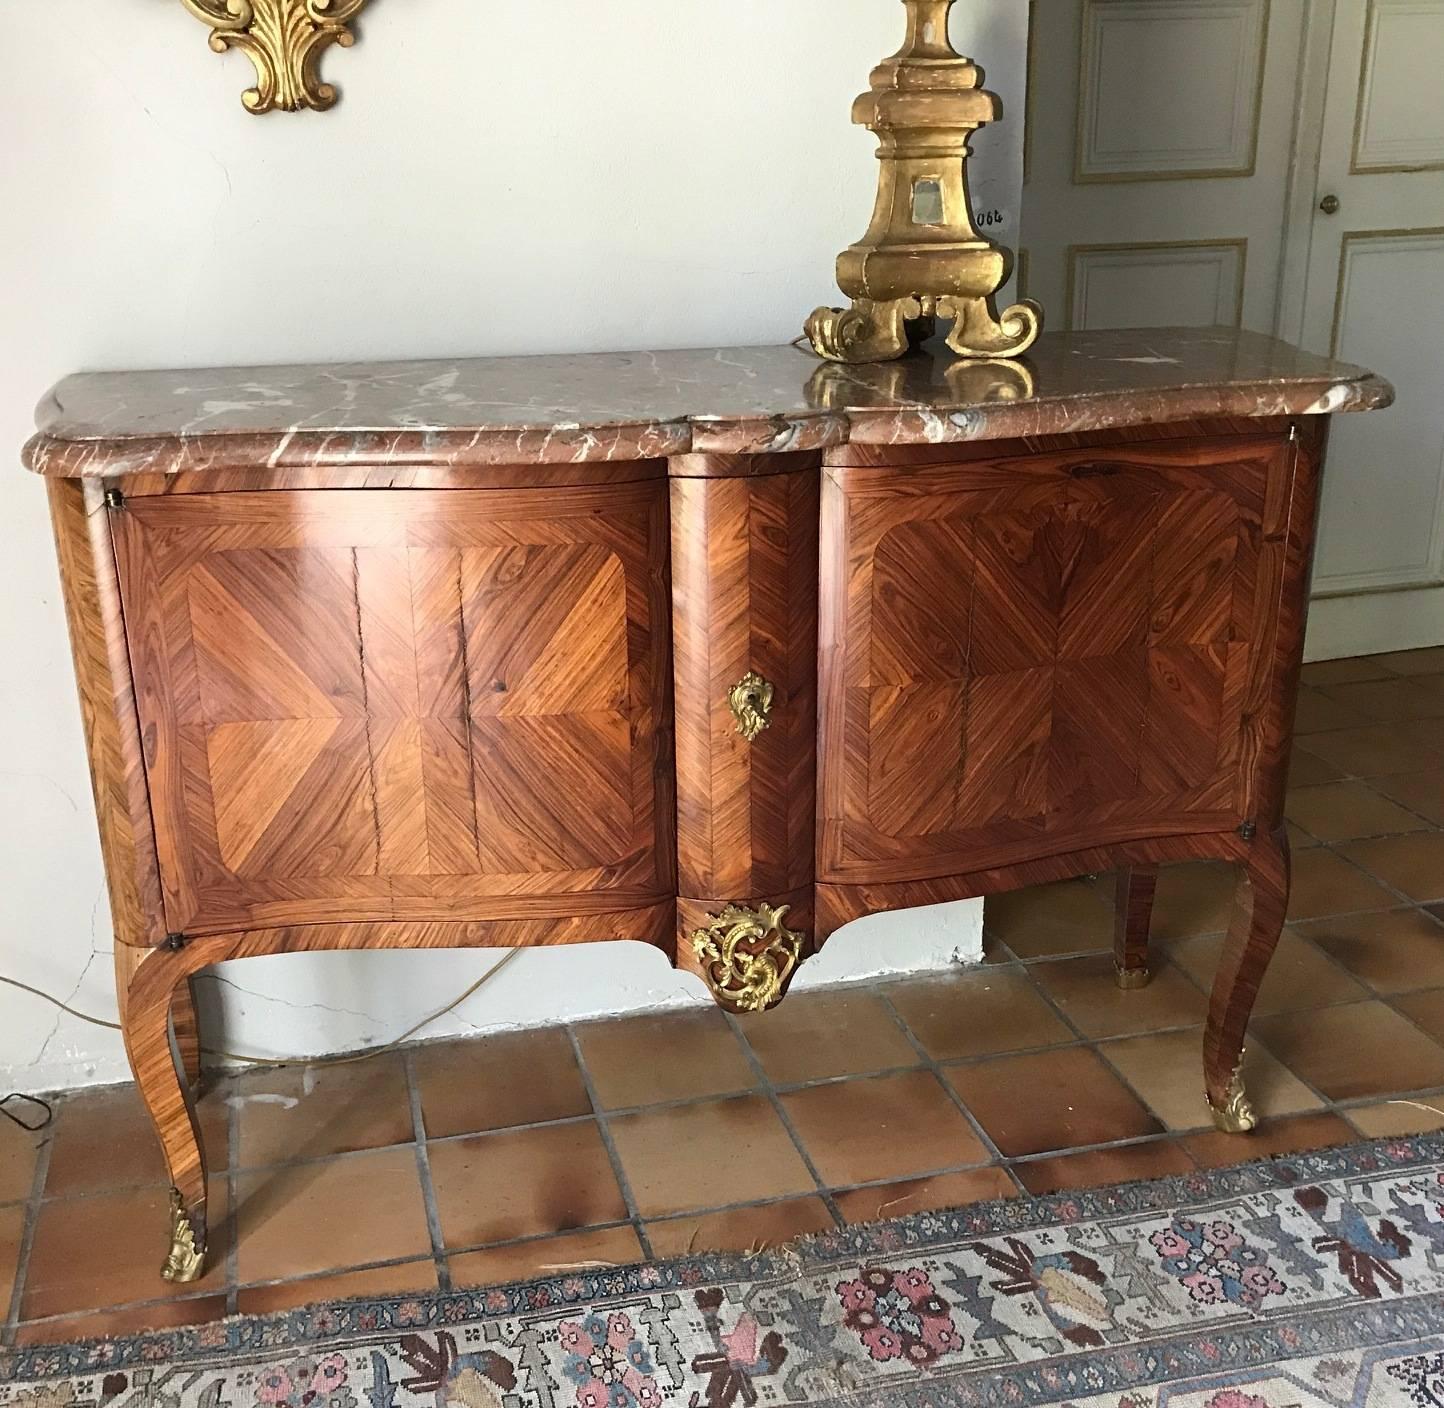 A small, elegant bookmatched marquetry veneered enfilade. Louis XV style, dating from the early 19th century. Original rose marble top and great quality bronze mounts. The marquetry is fruitwood, veneered on a solid oak base. The enfilade is in good